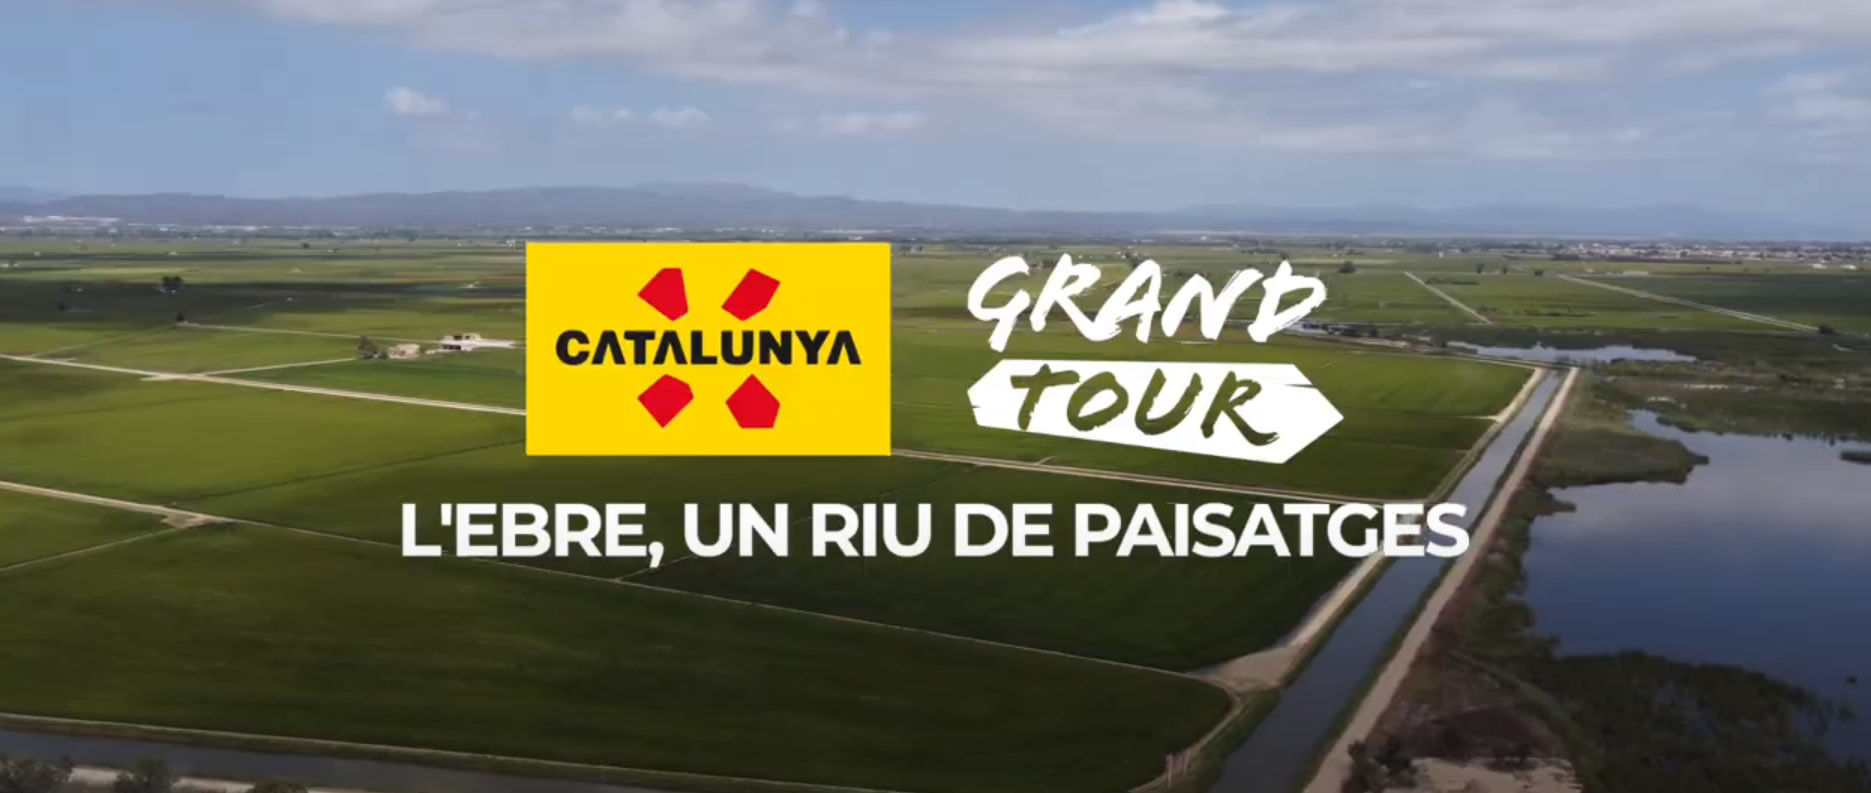 Grand Tour of Calaluña – The Ebro, a river of landscapes.